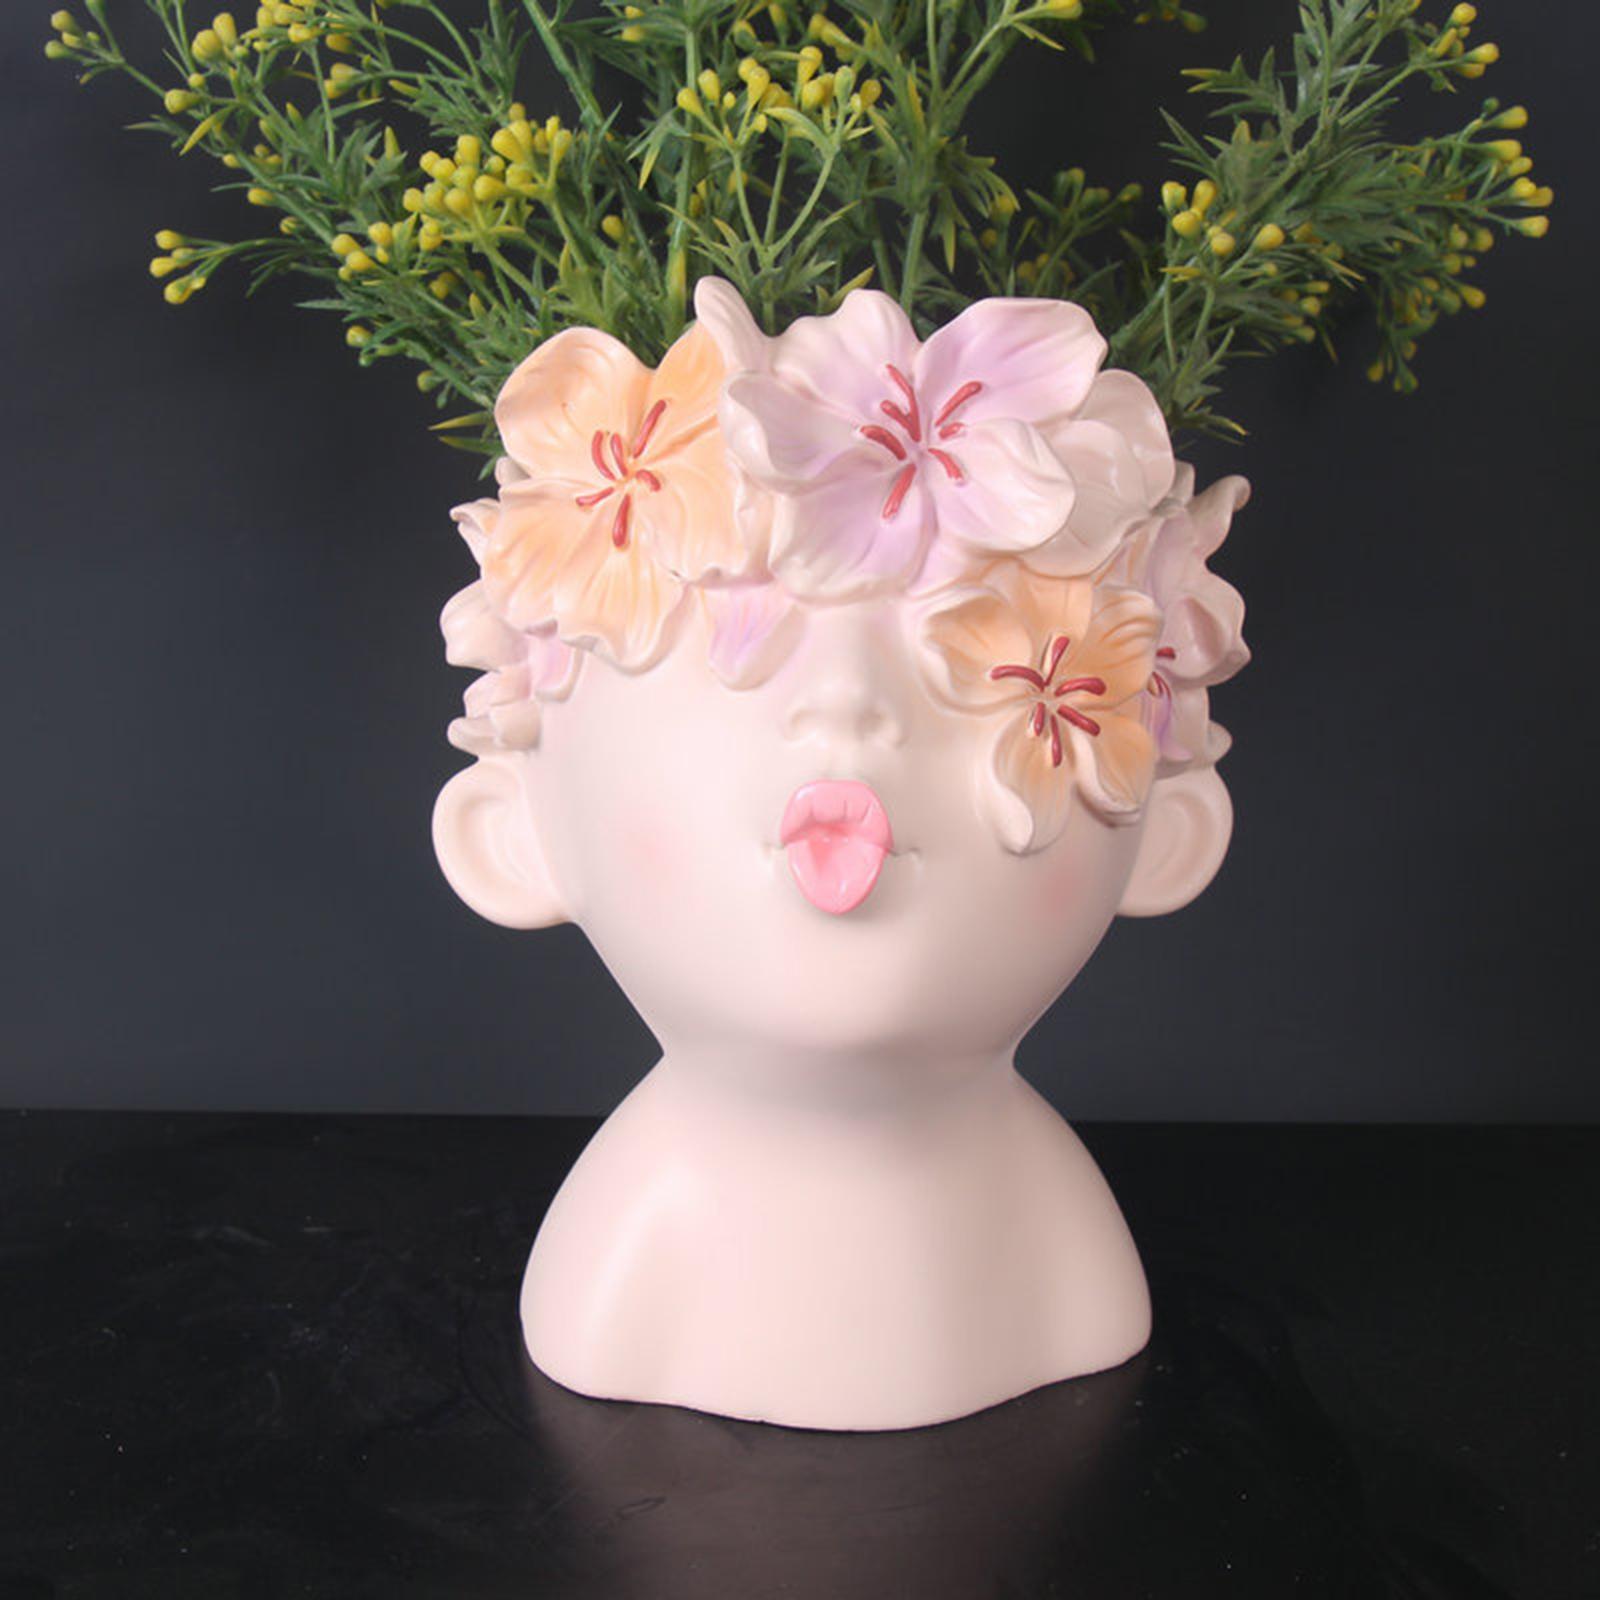 Head Planter Gift Tabletop Crafts Sculpture Statue Vase for Party Home Decor